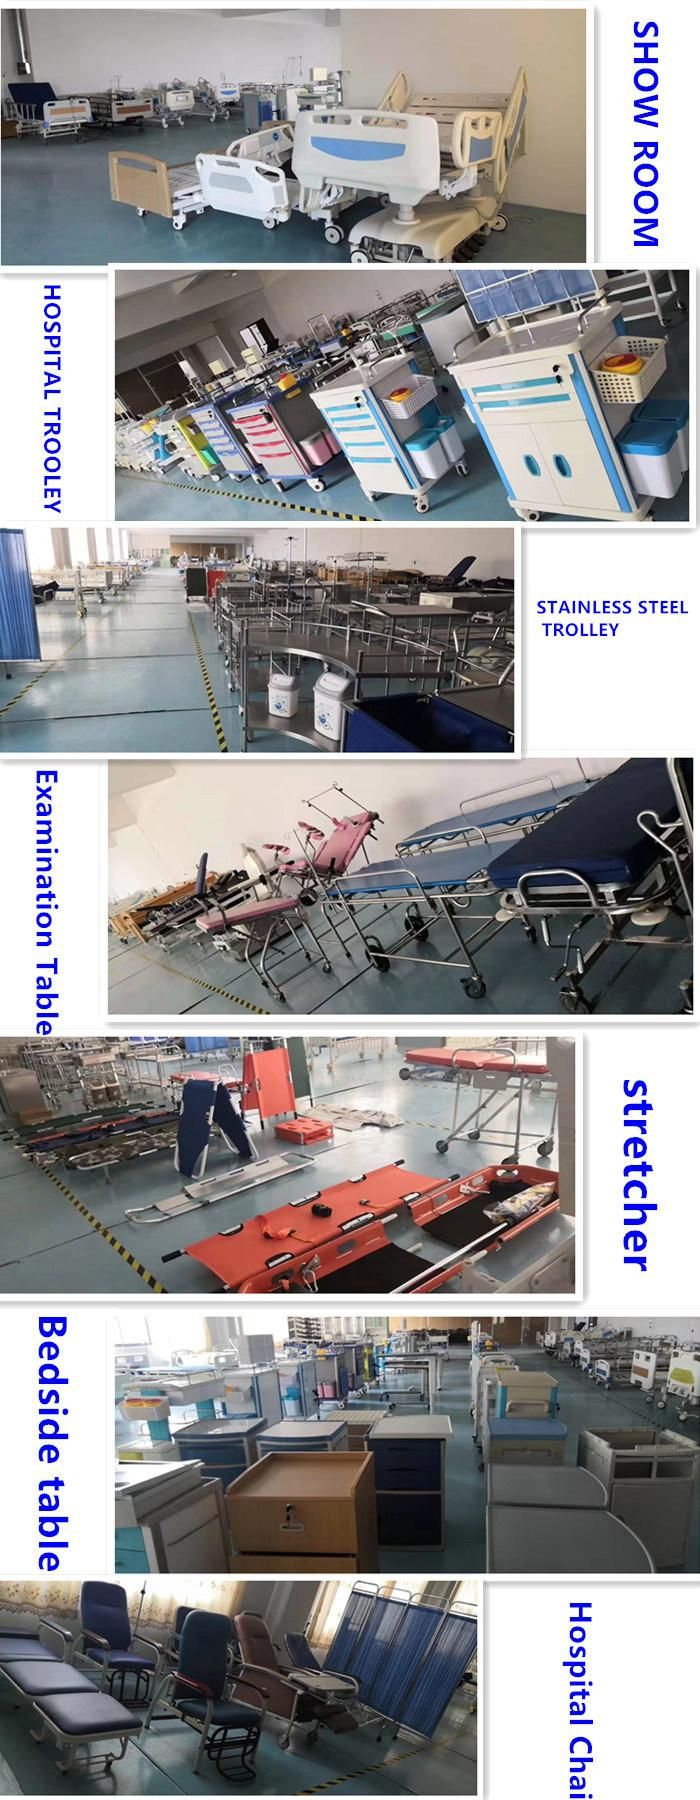 Gynecological Delivery Bed Hospital Examination Obstetric Table